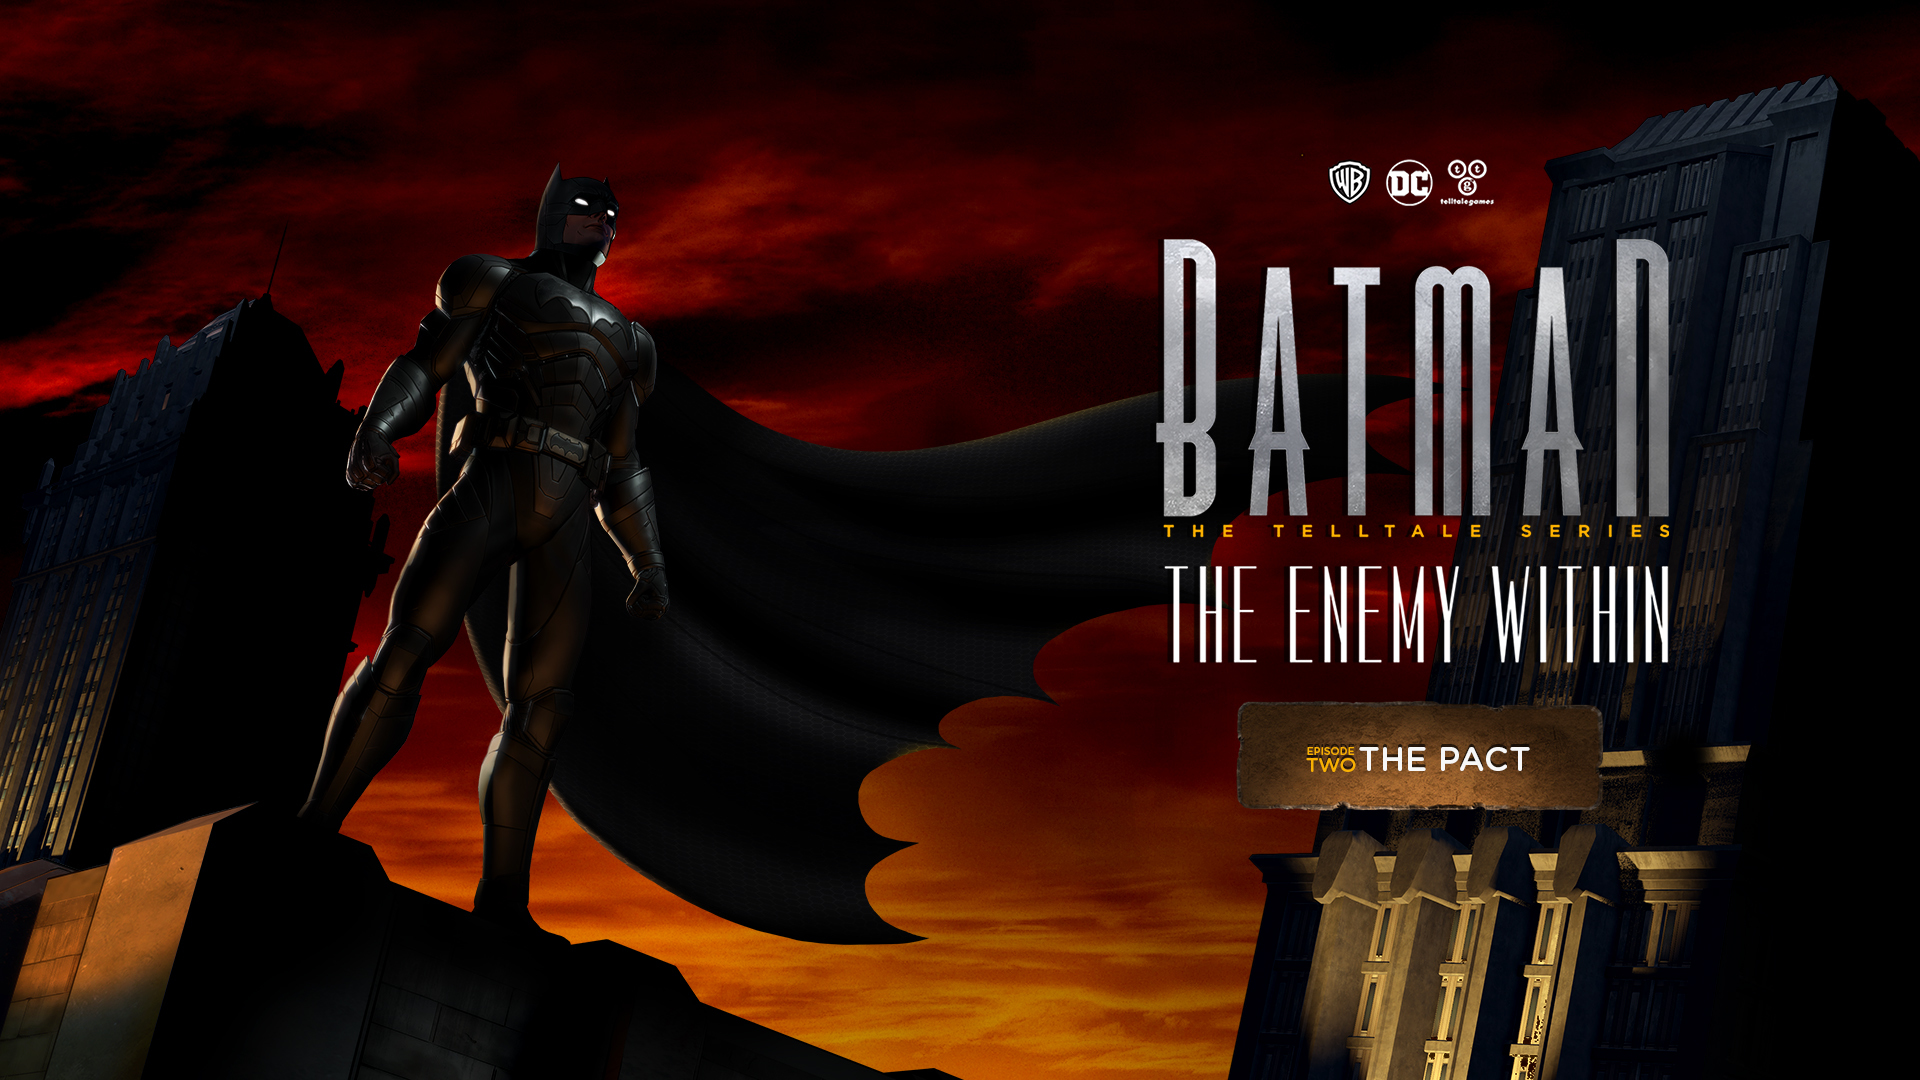 Steam :: Batman: The Enemy Within - The Telltale Series :: Episode Two -  "The Pact" - Available Now!